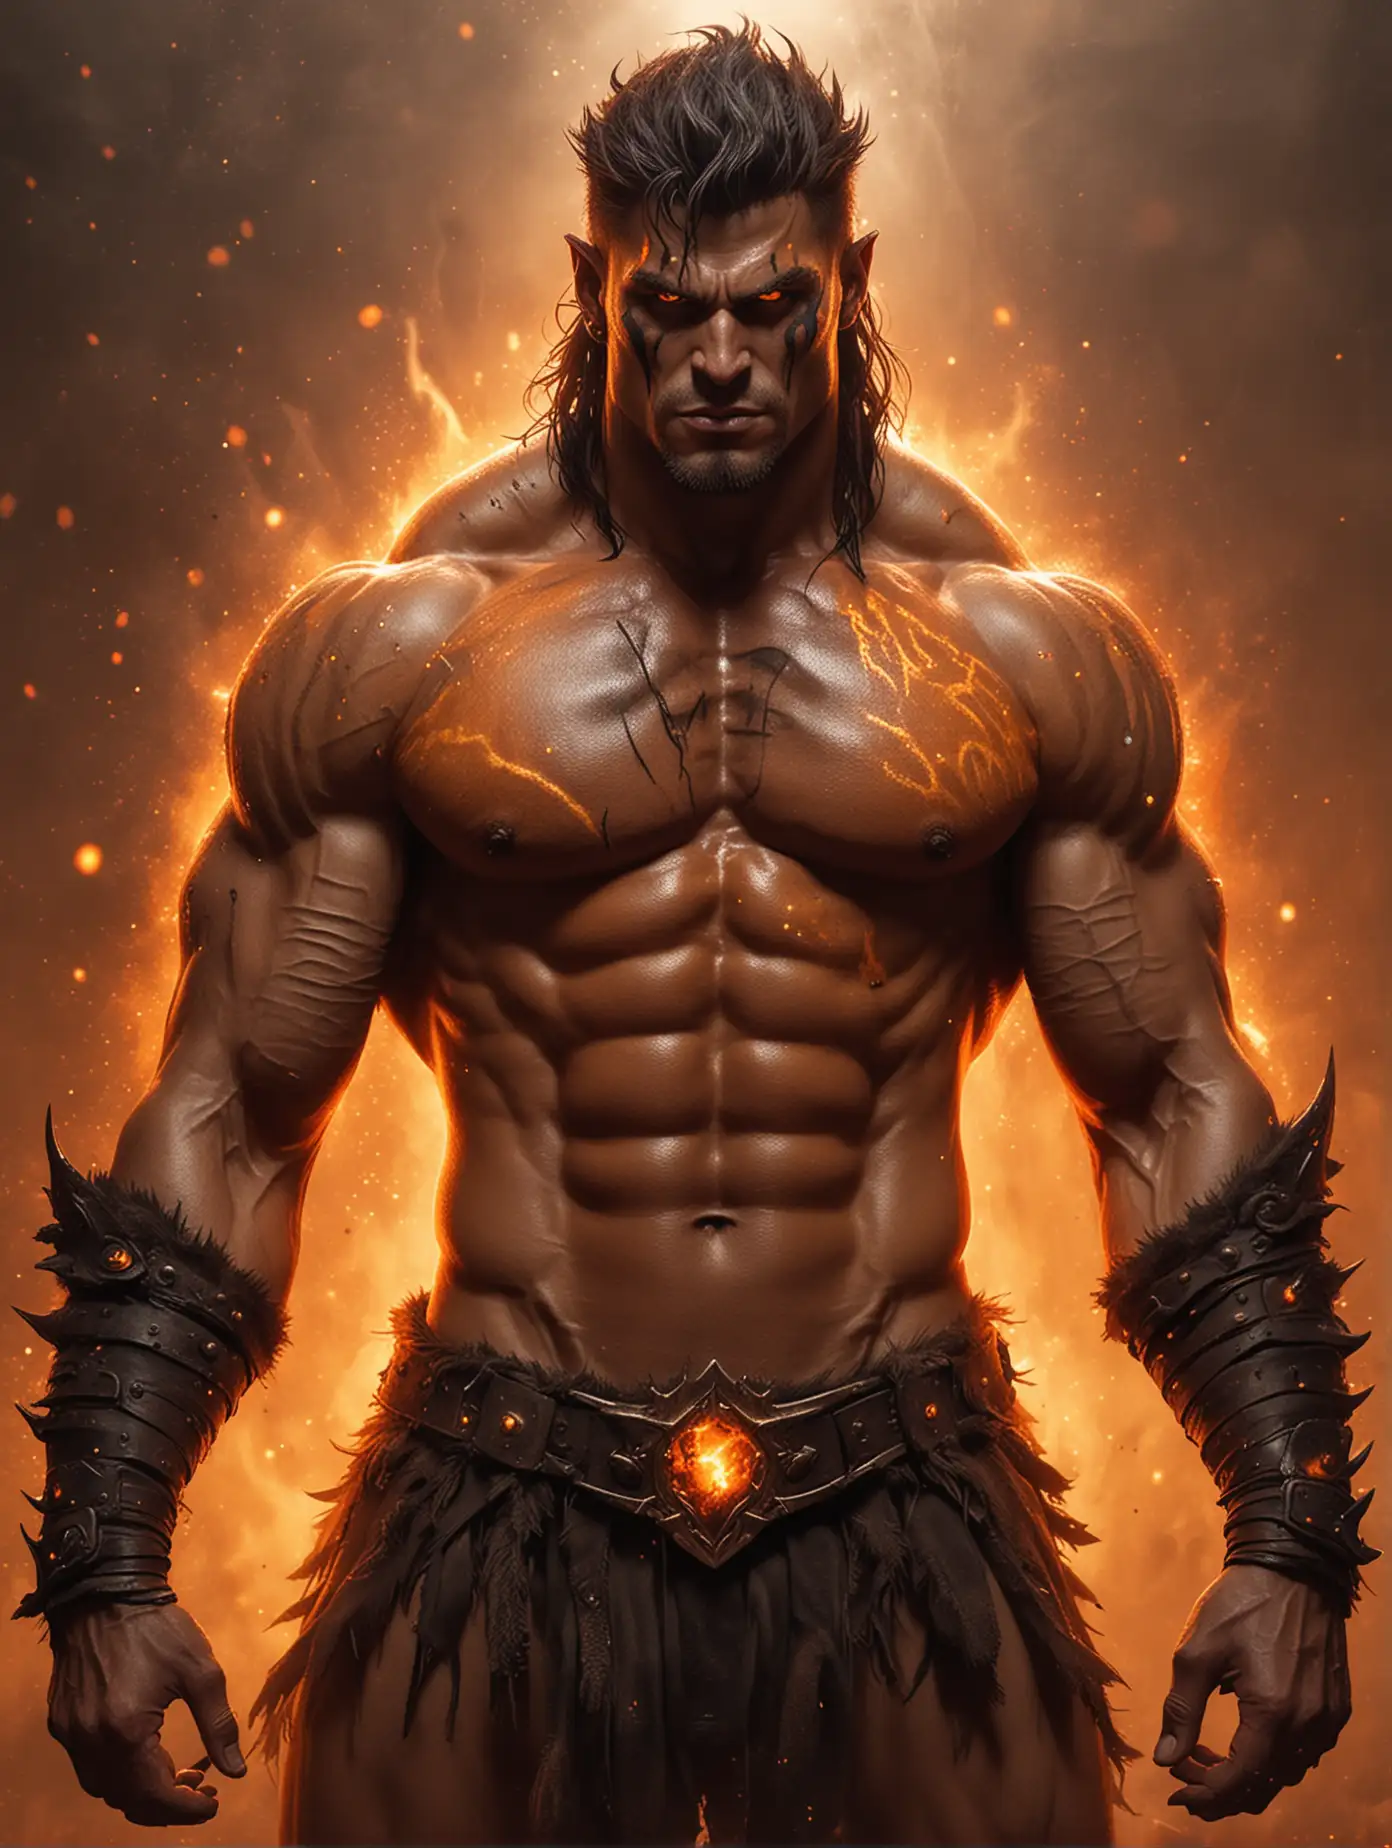 Barbarian Alien Muscular Man with Orange Flames and Gold Sparks